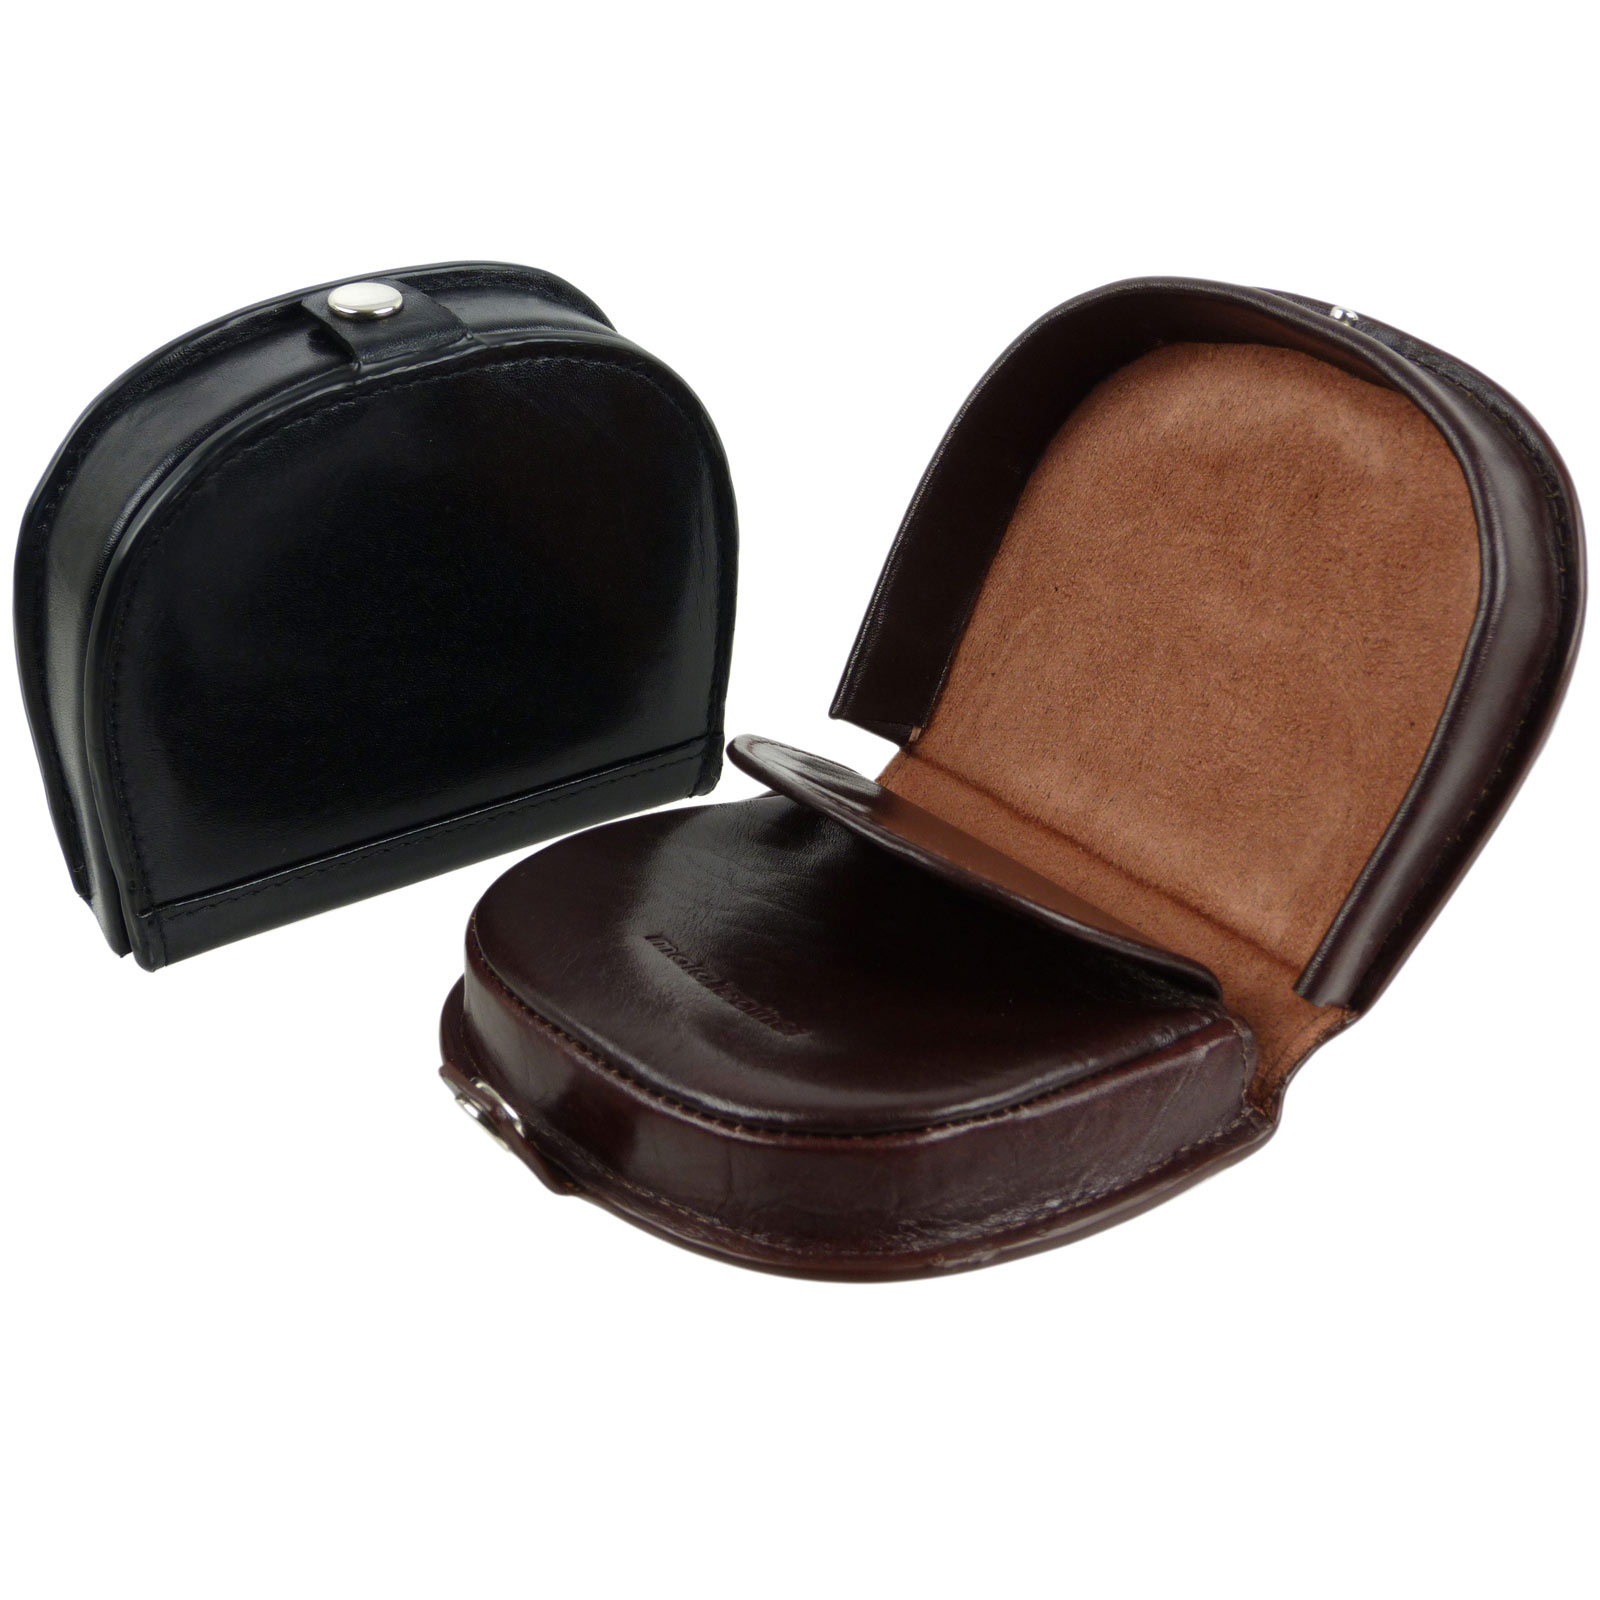 Mens Quality Gents Leather Coin Tray/Purse by Mala Leather Change | eBay